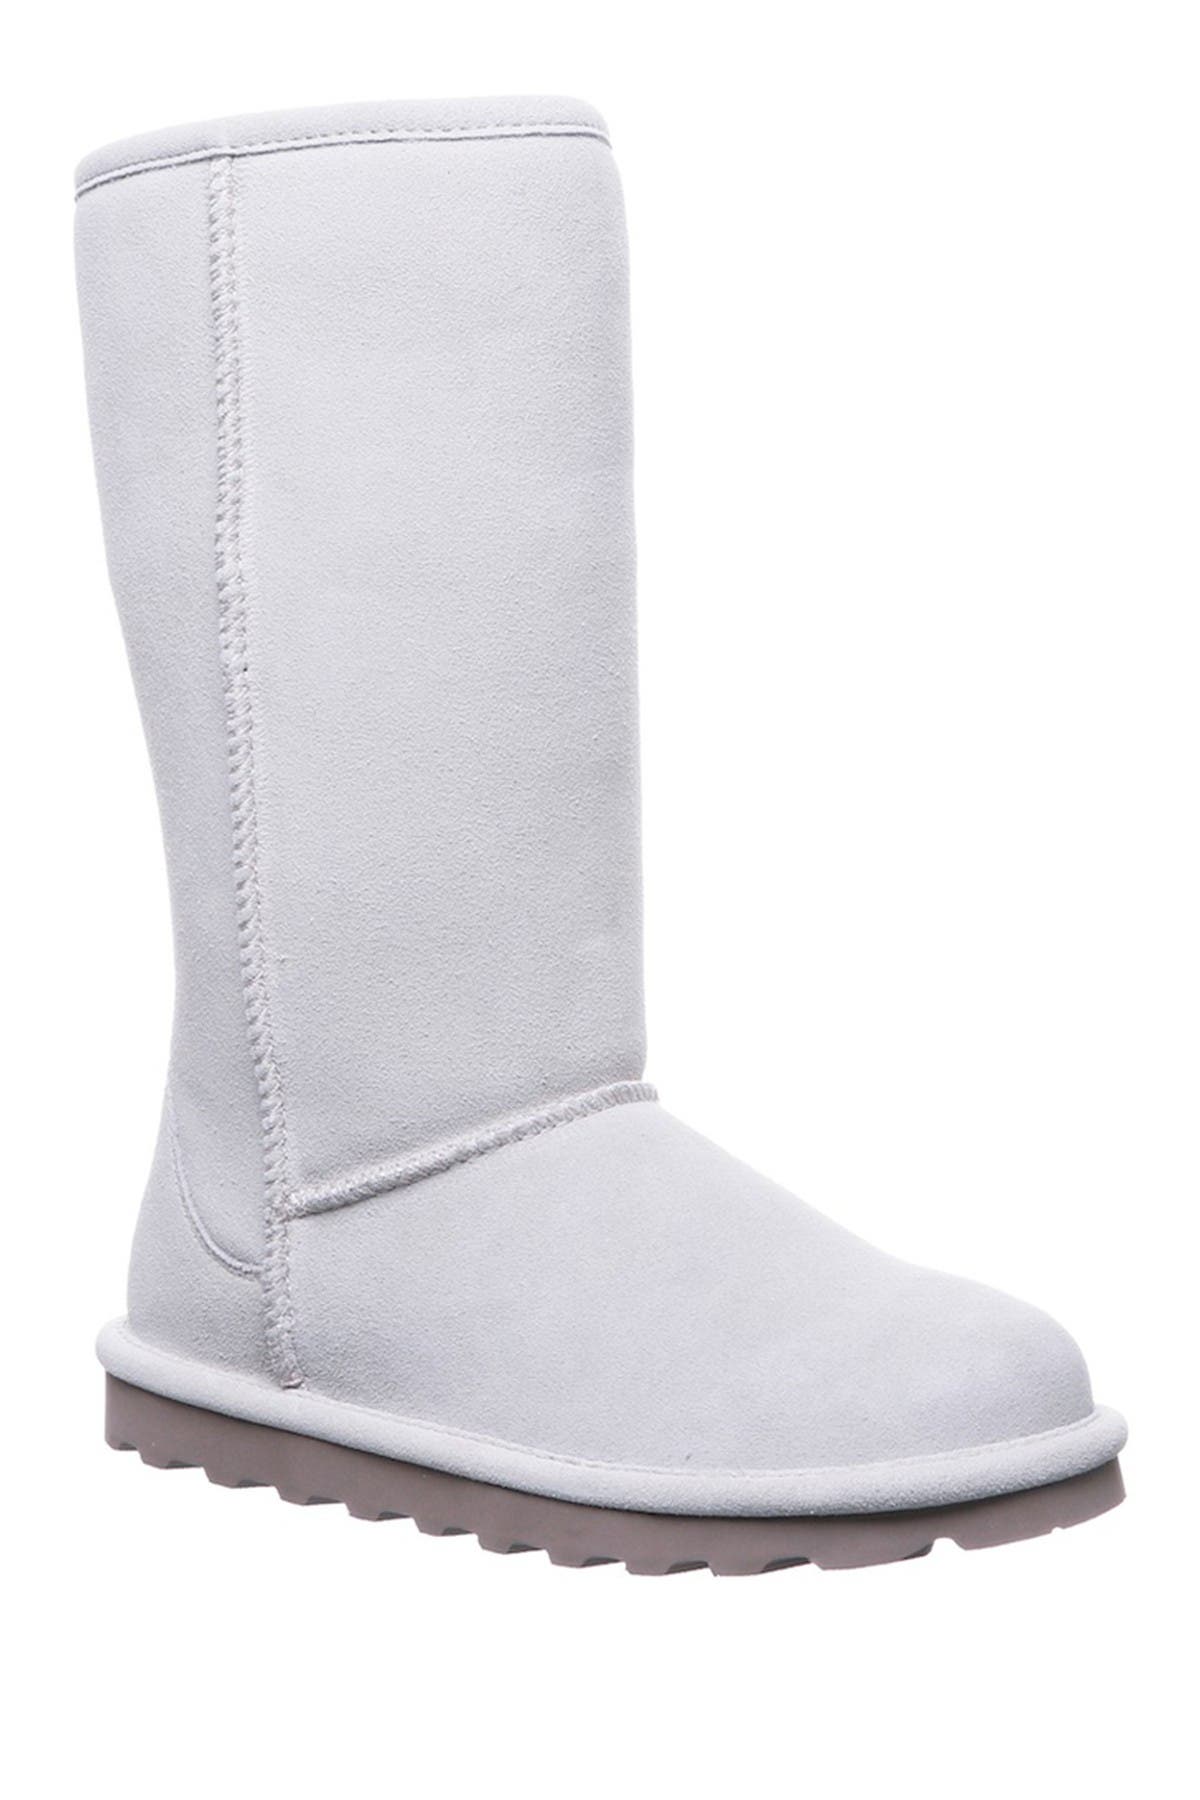 tall shearling lined boots